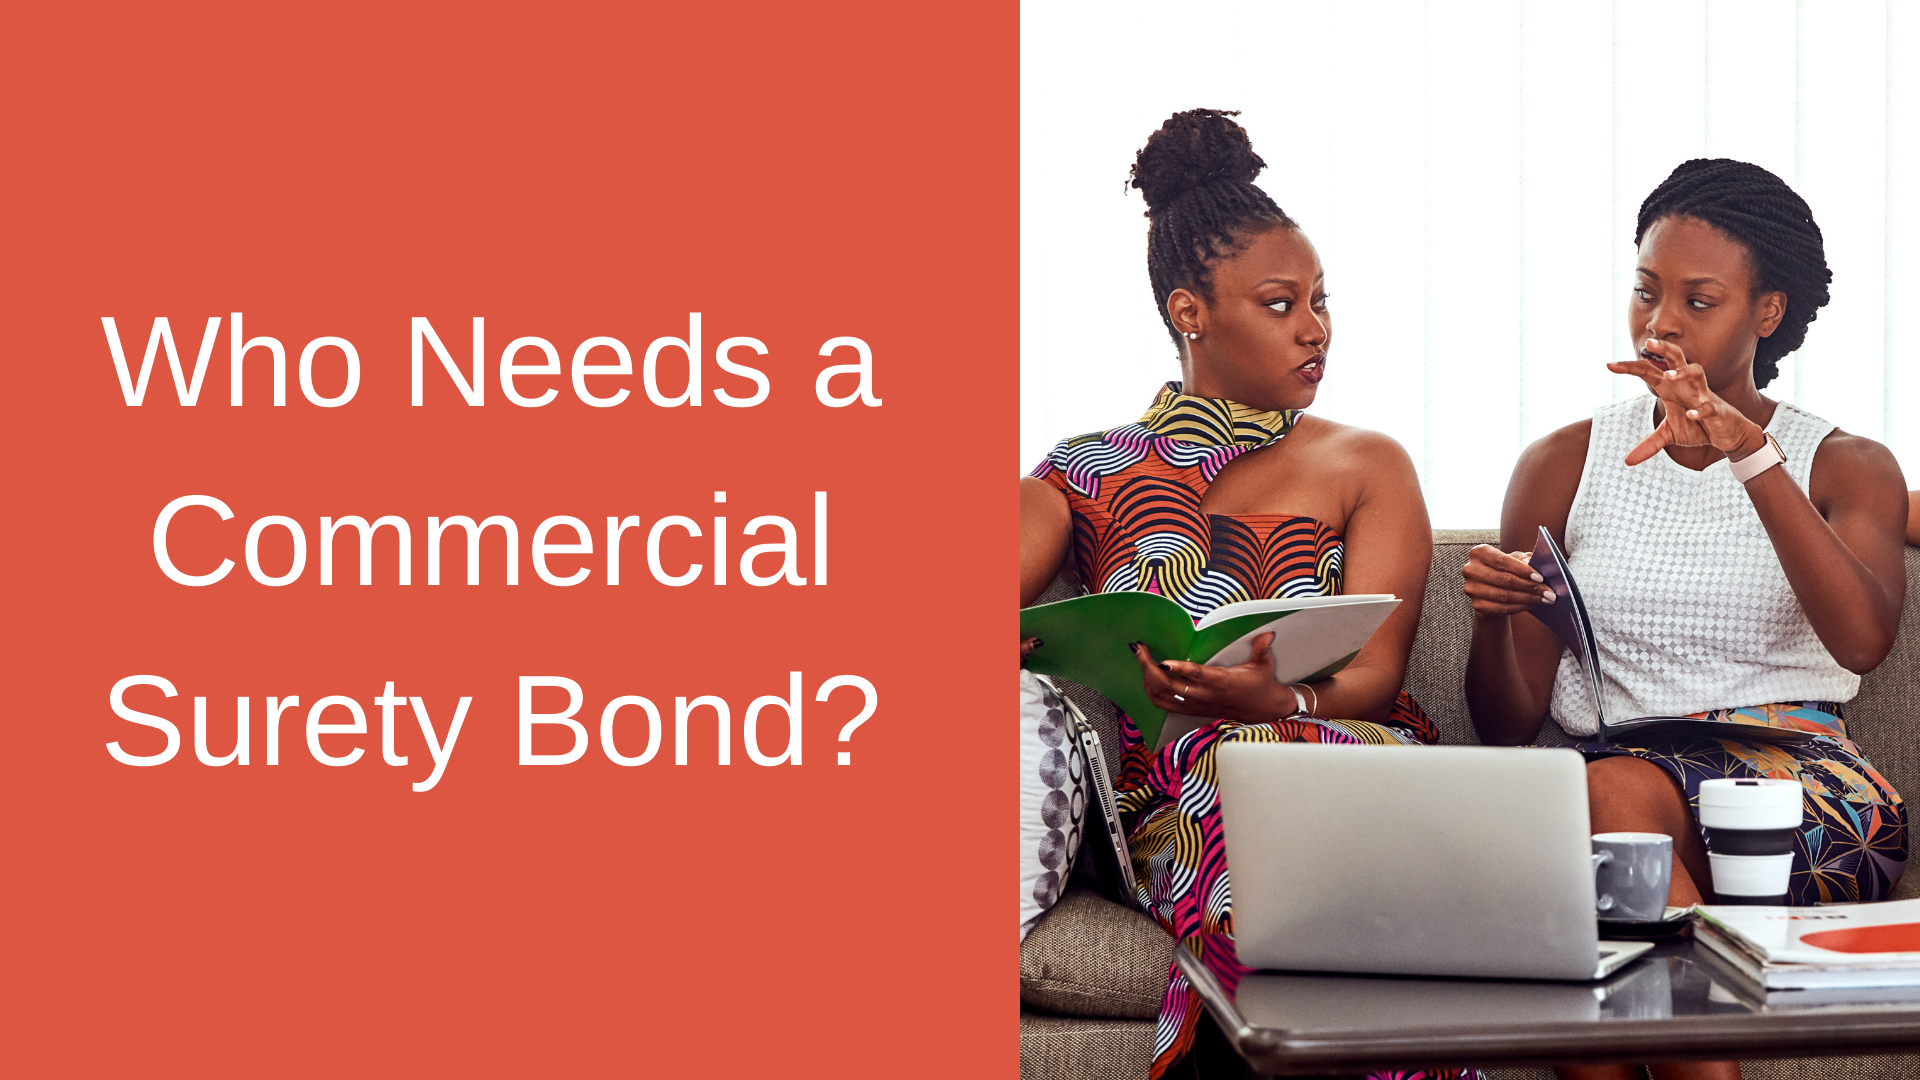 surety bond - What is the definition of a commercial surety bond